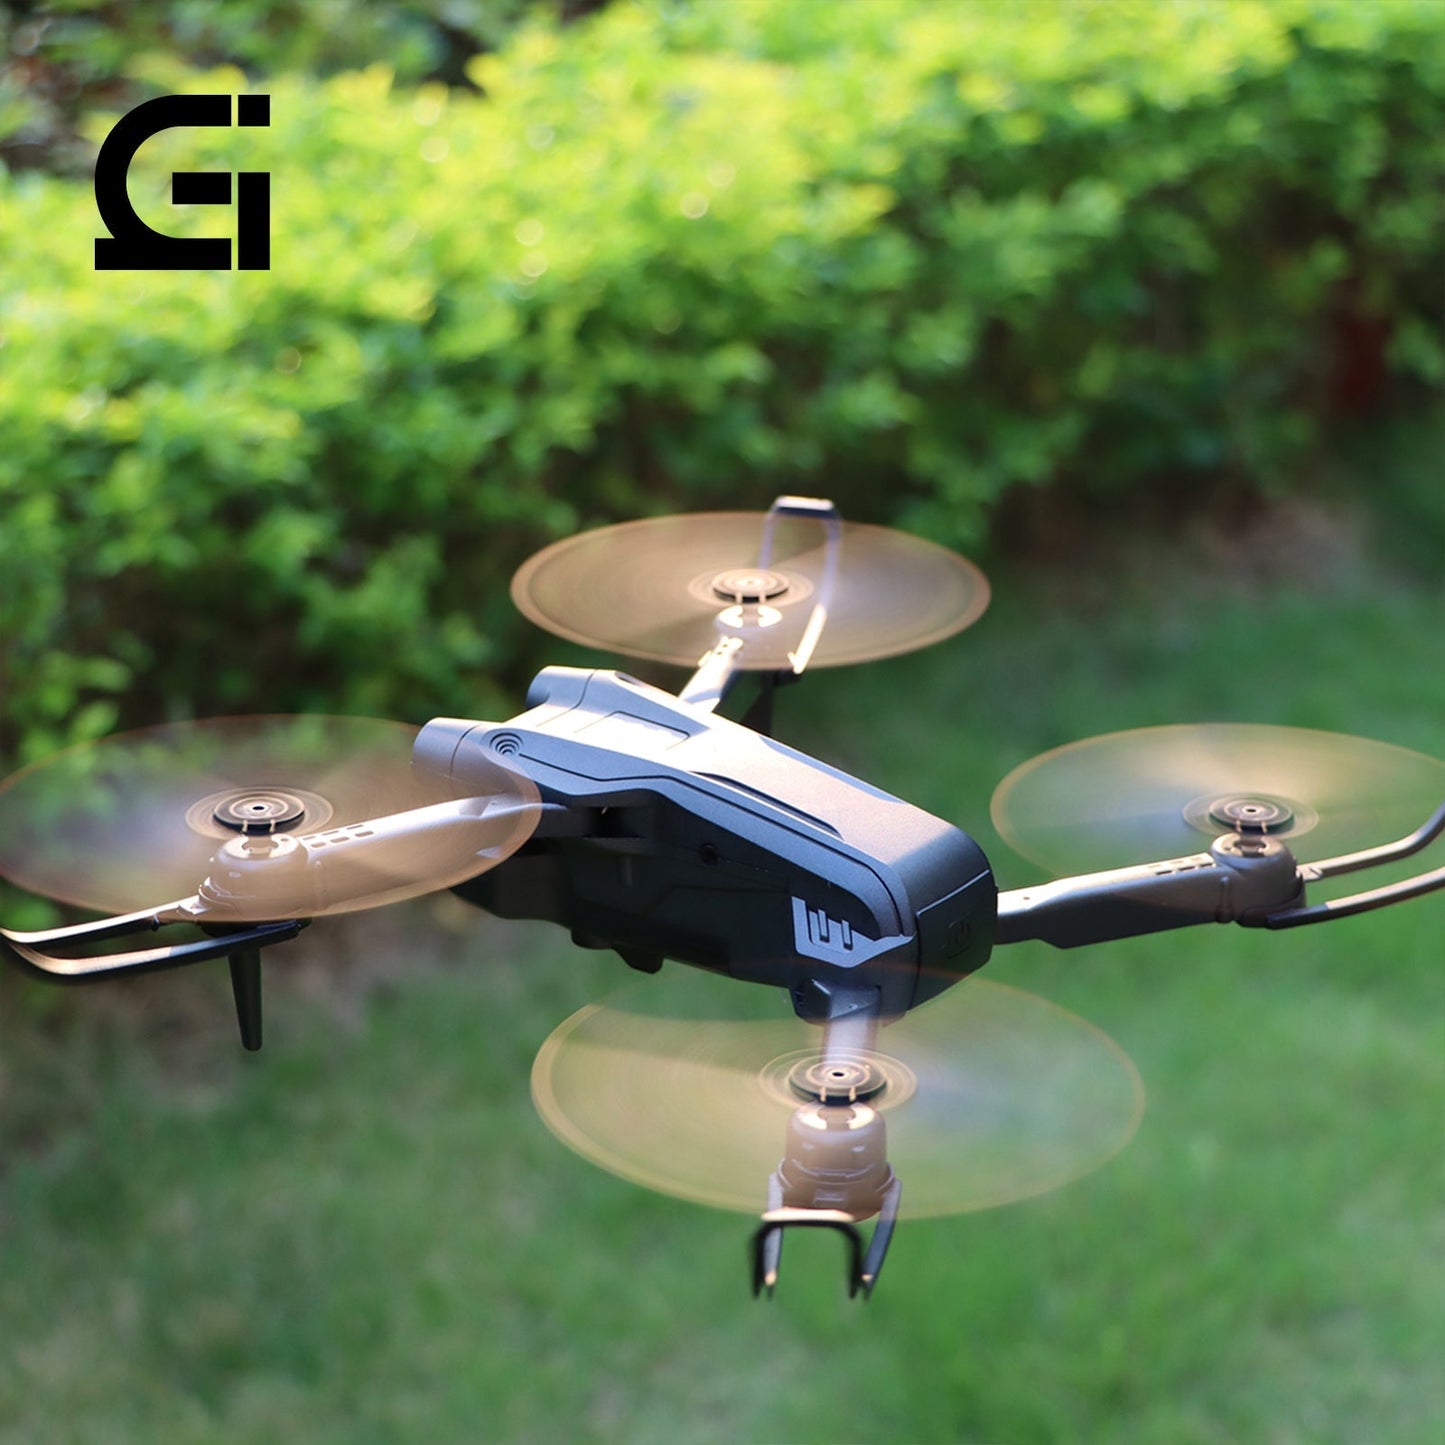 Drone caméra professionnel "Cyclone" - Gadget-In-Utile